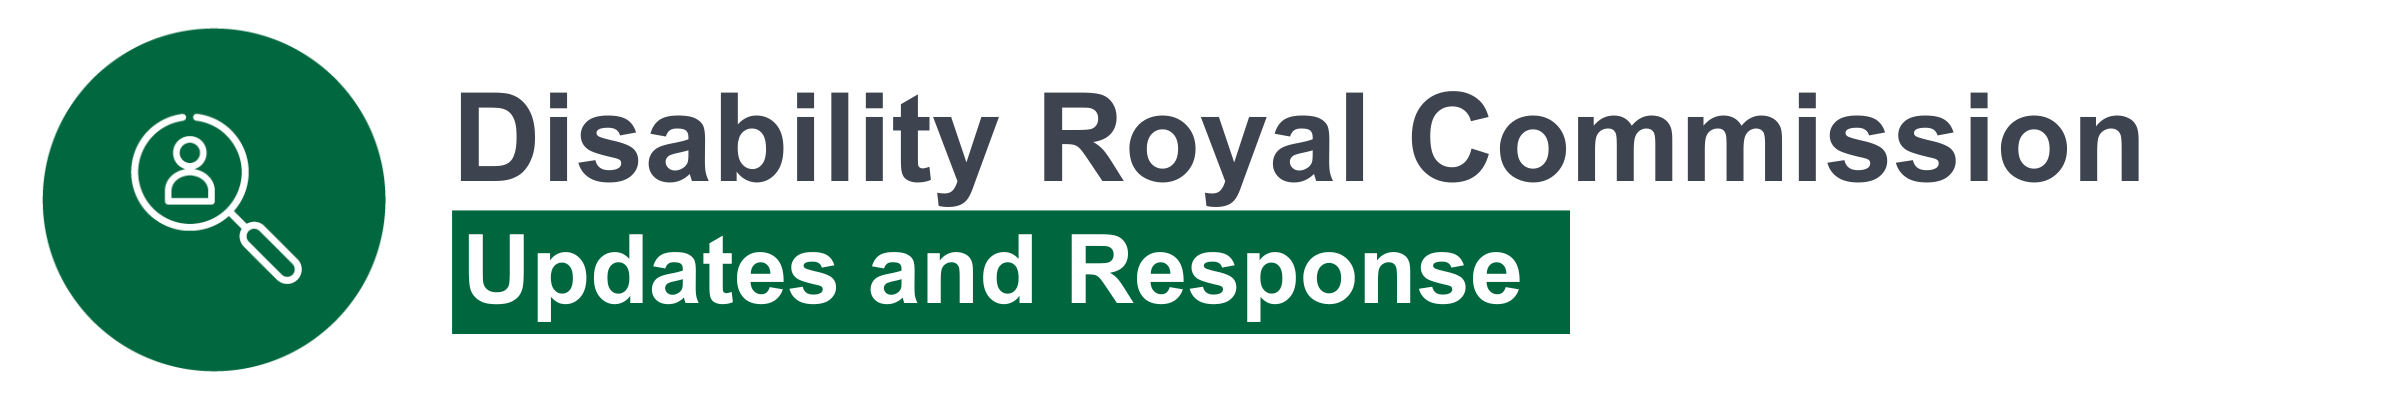 Disability Royal Commission Updates and Response